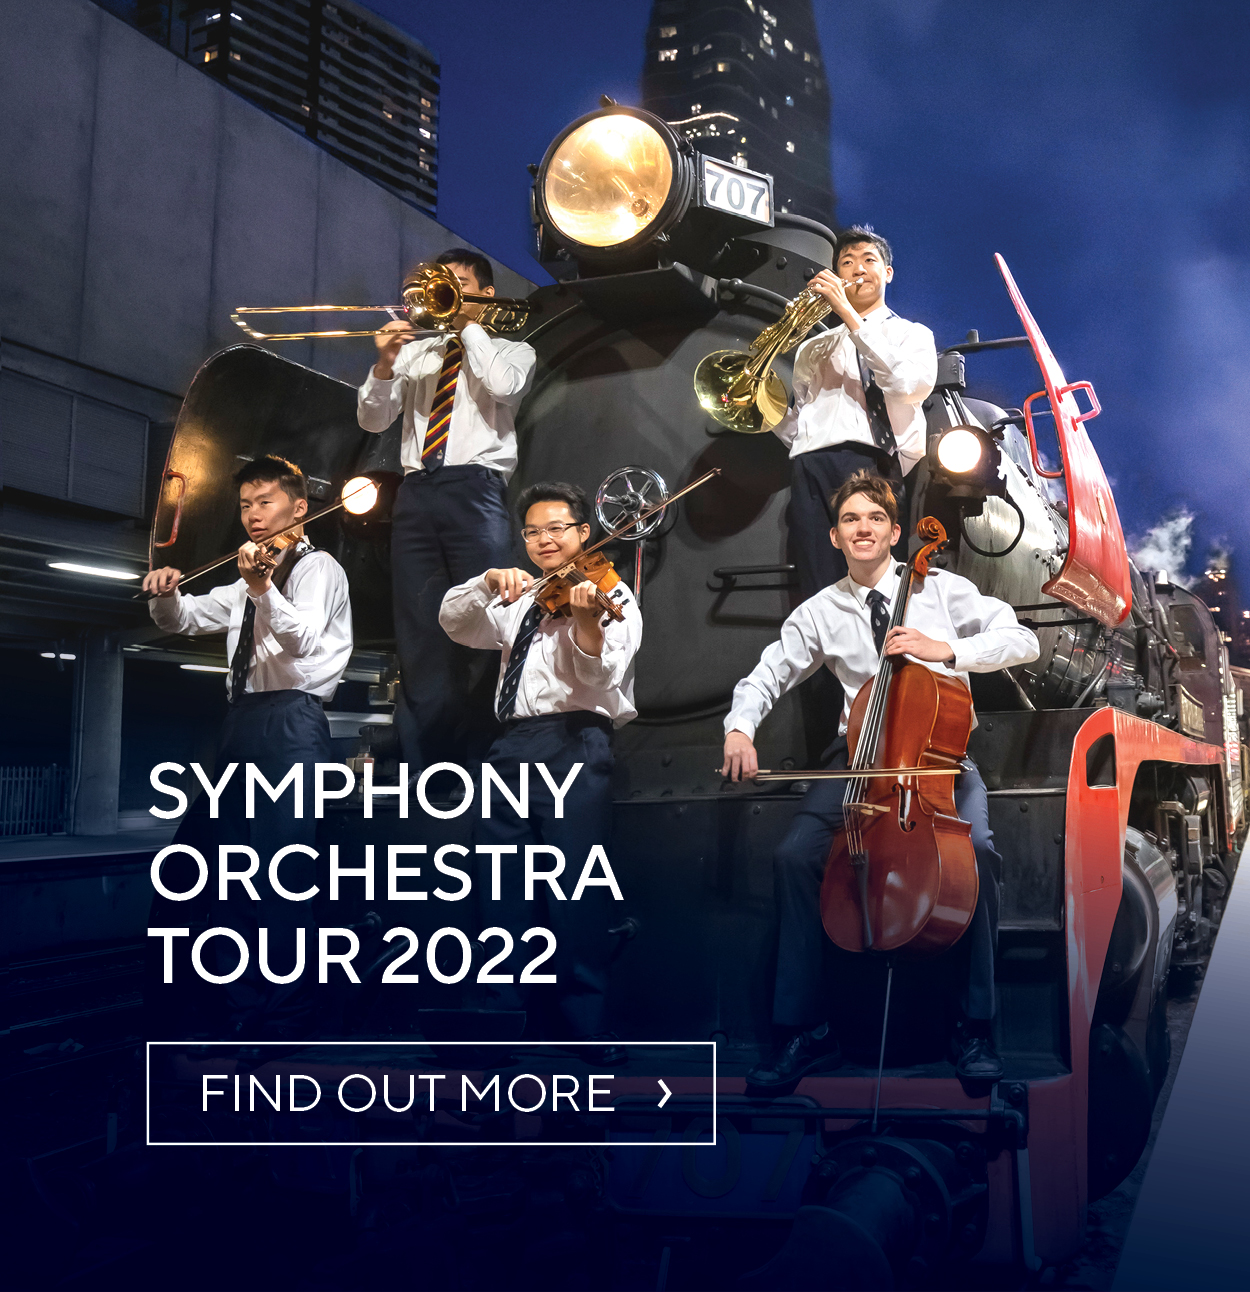 Synphony Orchestra Tour 2022